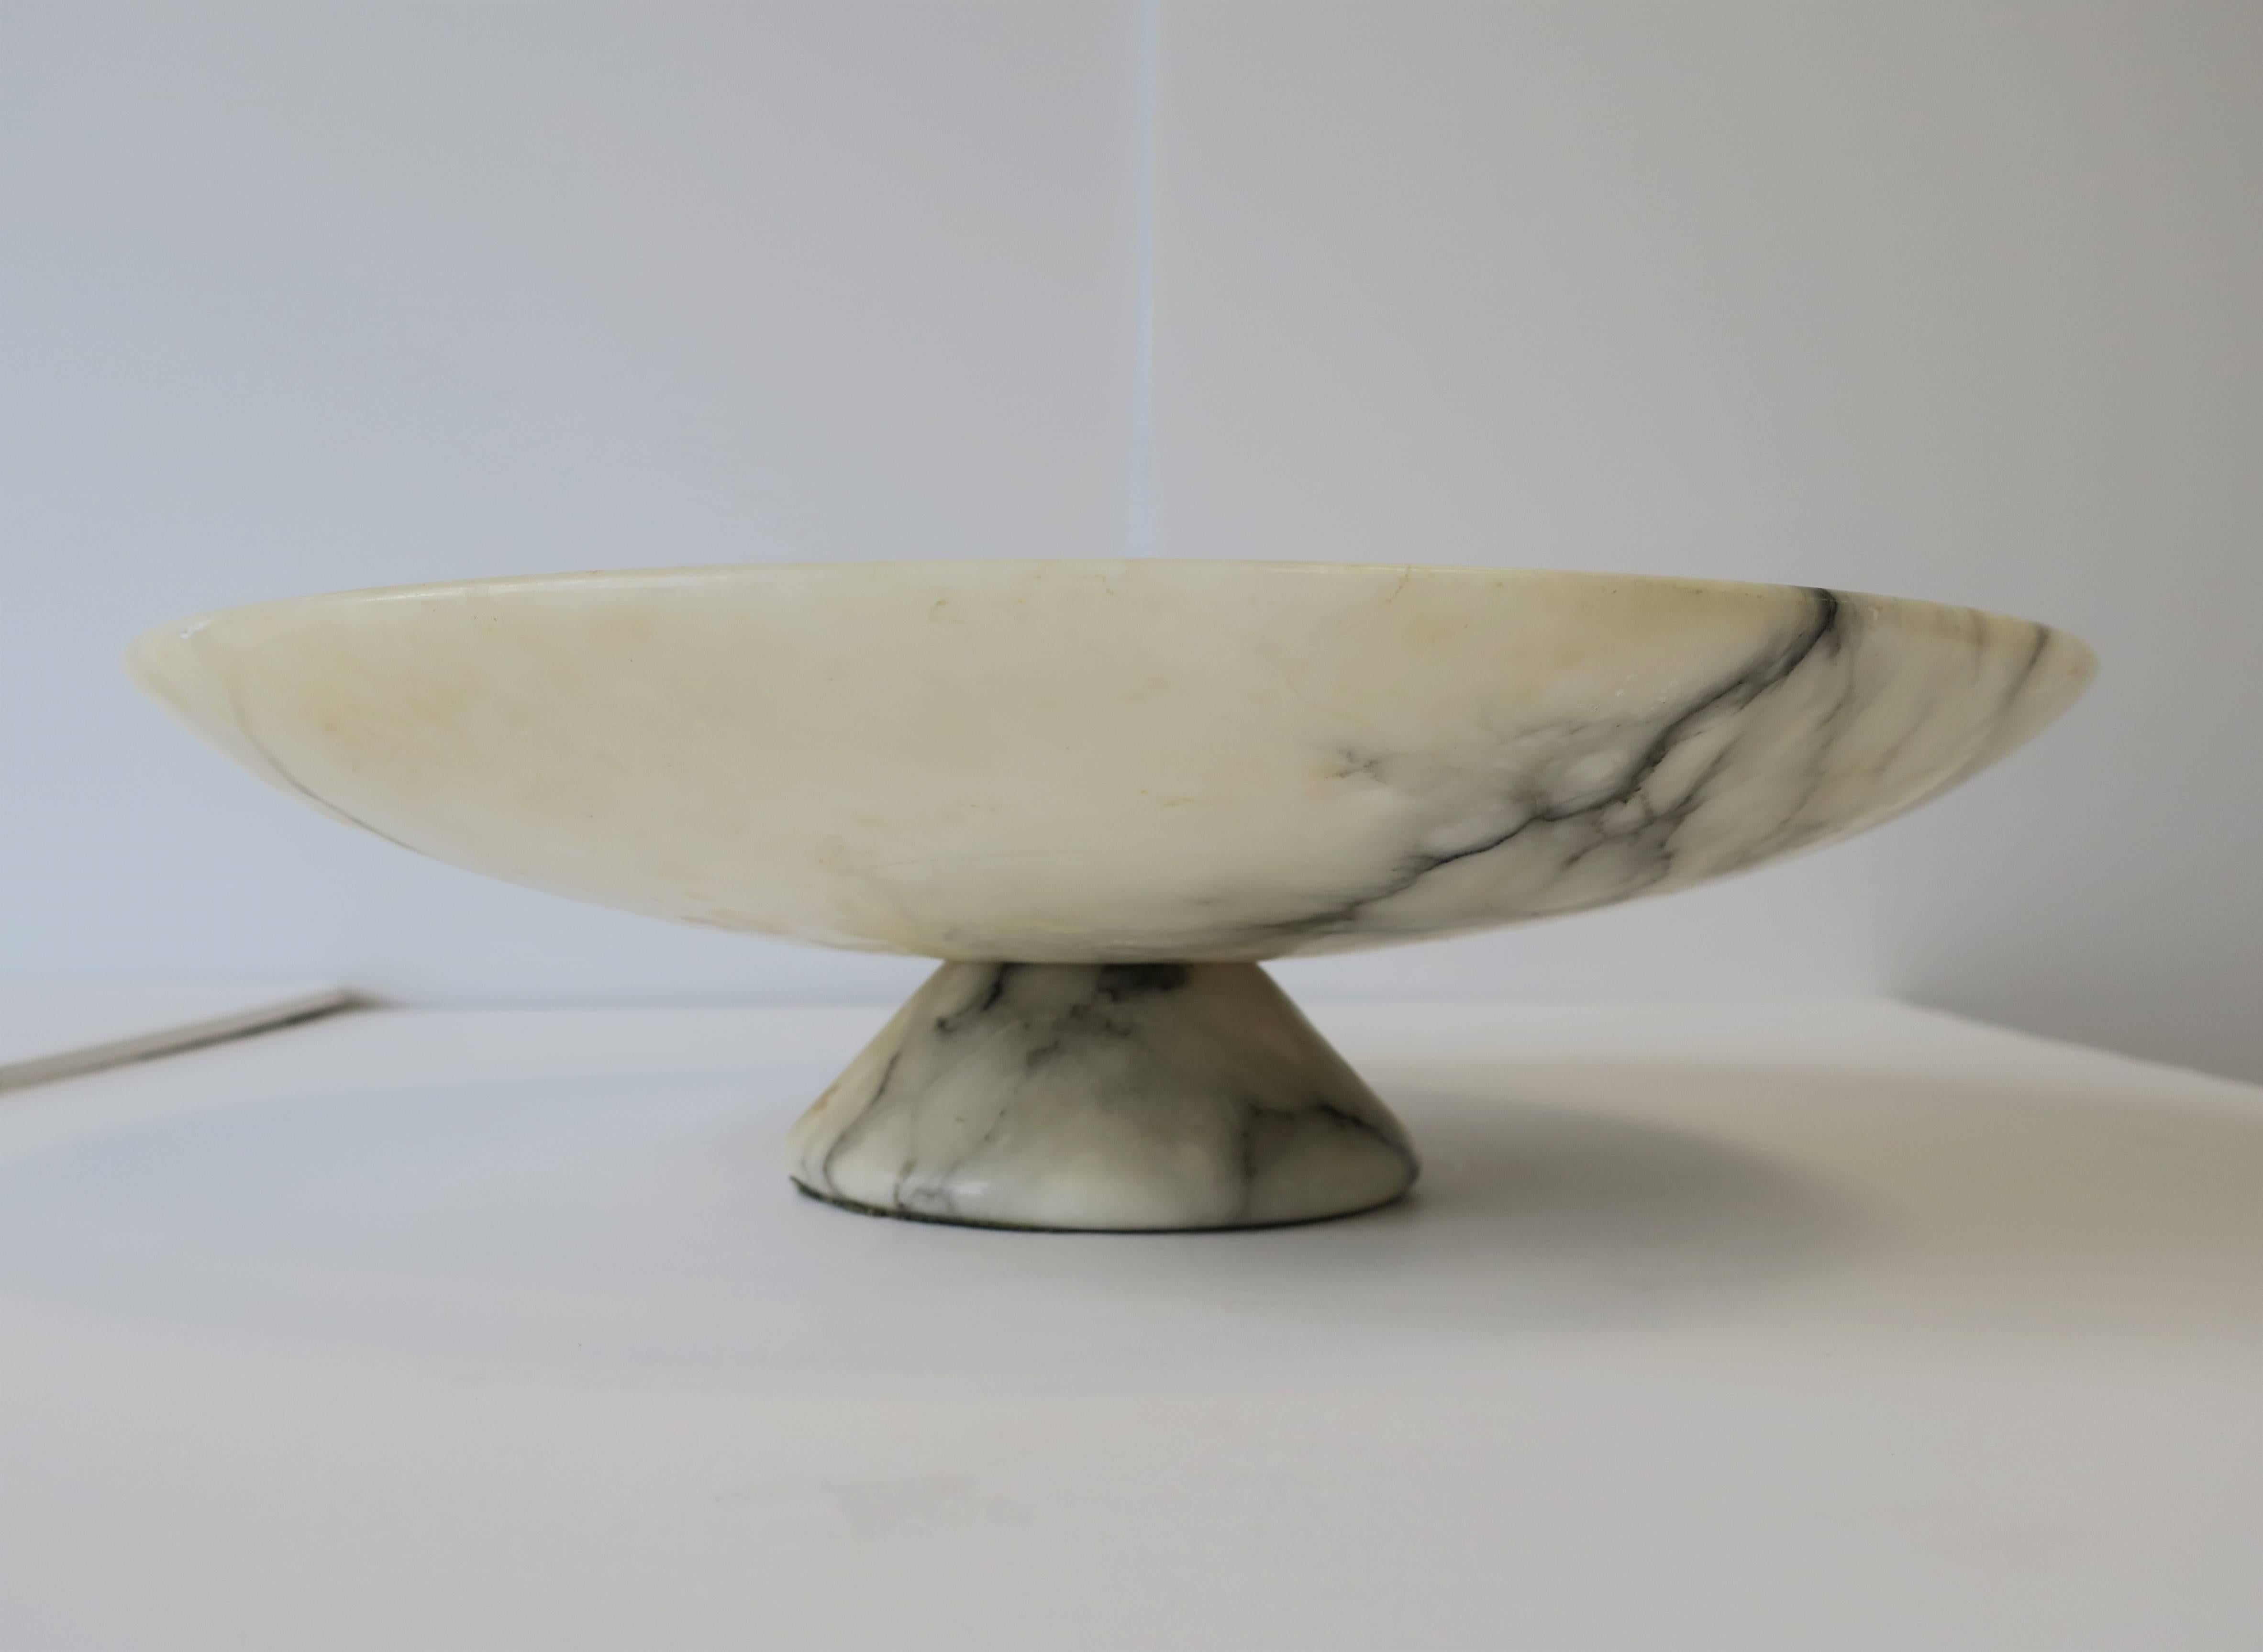 Modern Italian Black and White Marble Tazza Compote or Centerpiece Bowl